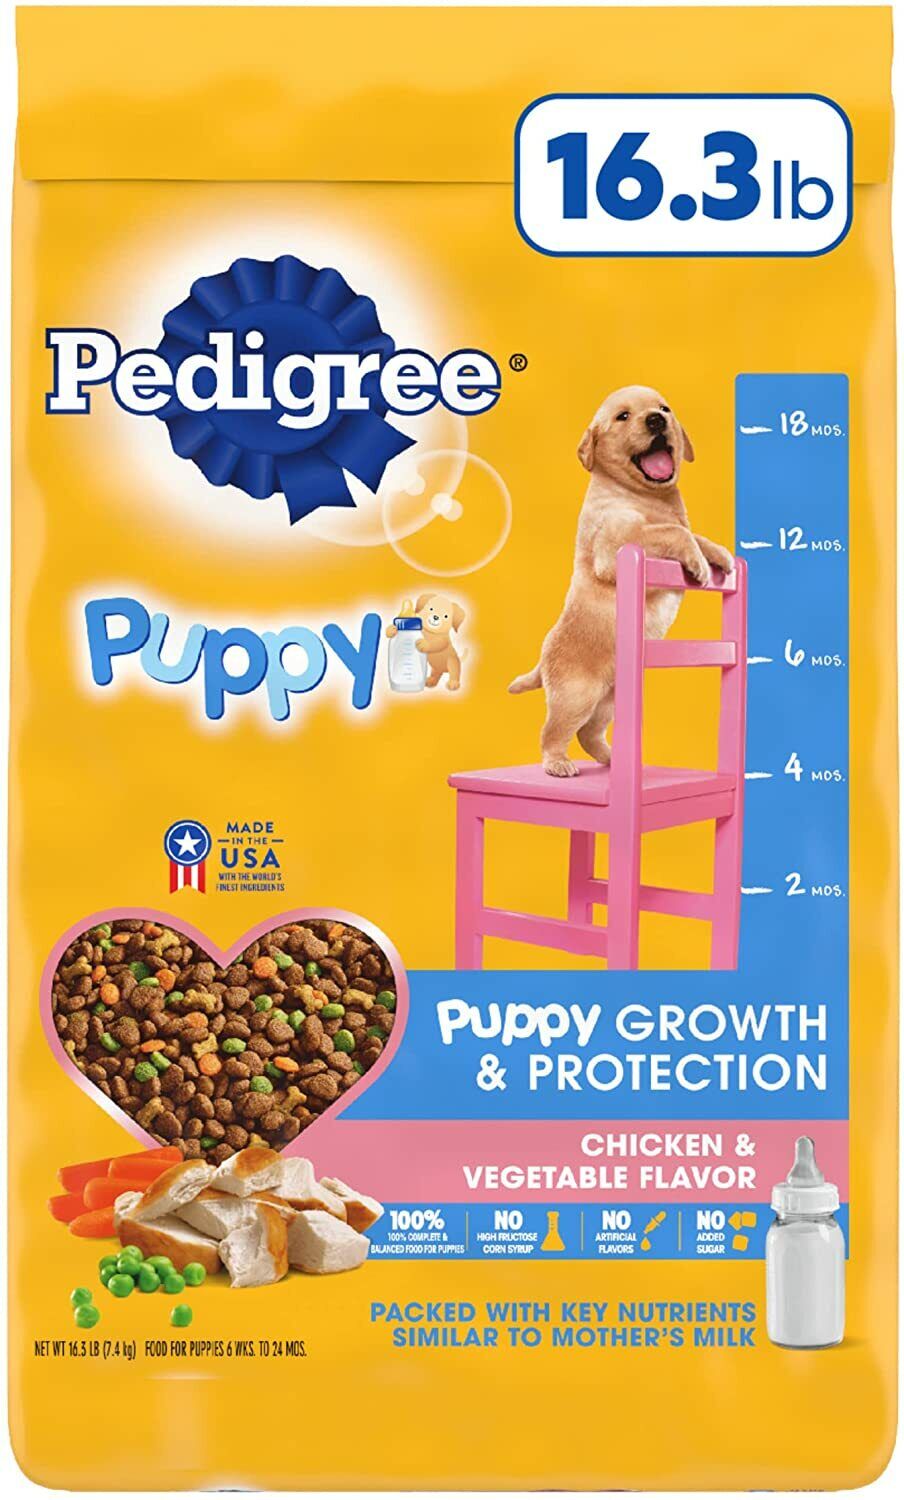 PEDIGREE Puppy Growth & Protection Dry Dog Food Chicken & Vegetable, 16.3 lb.Bag